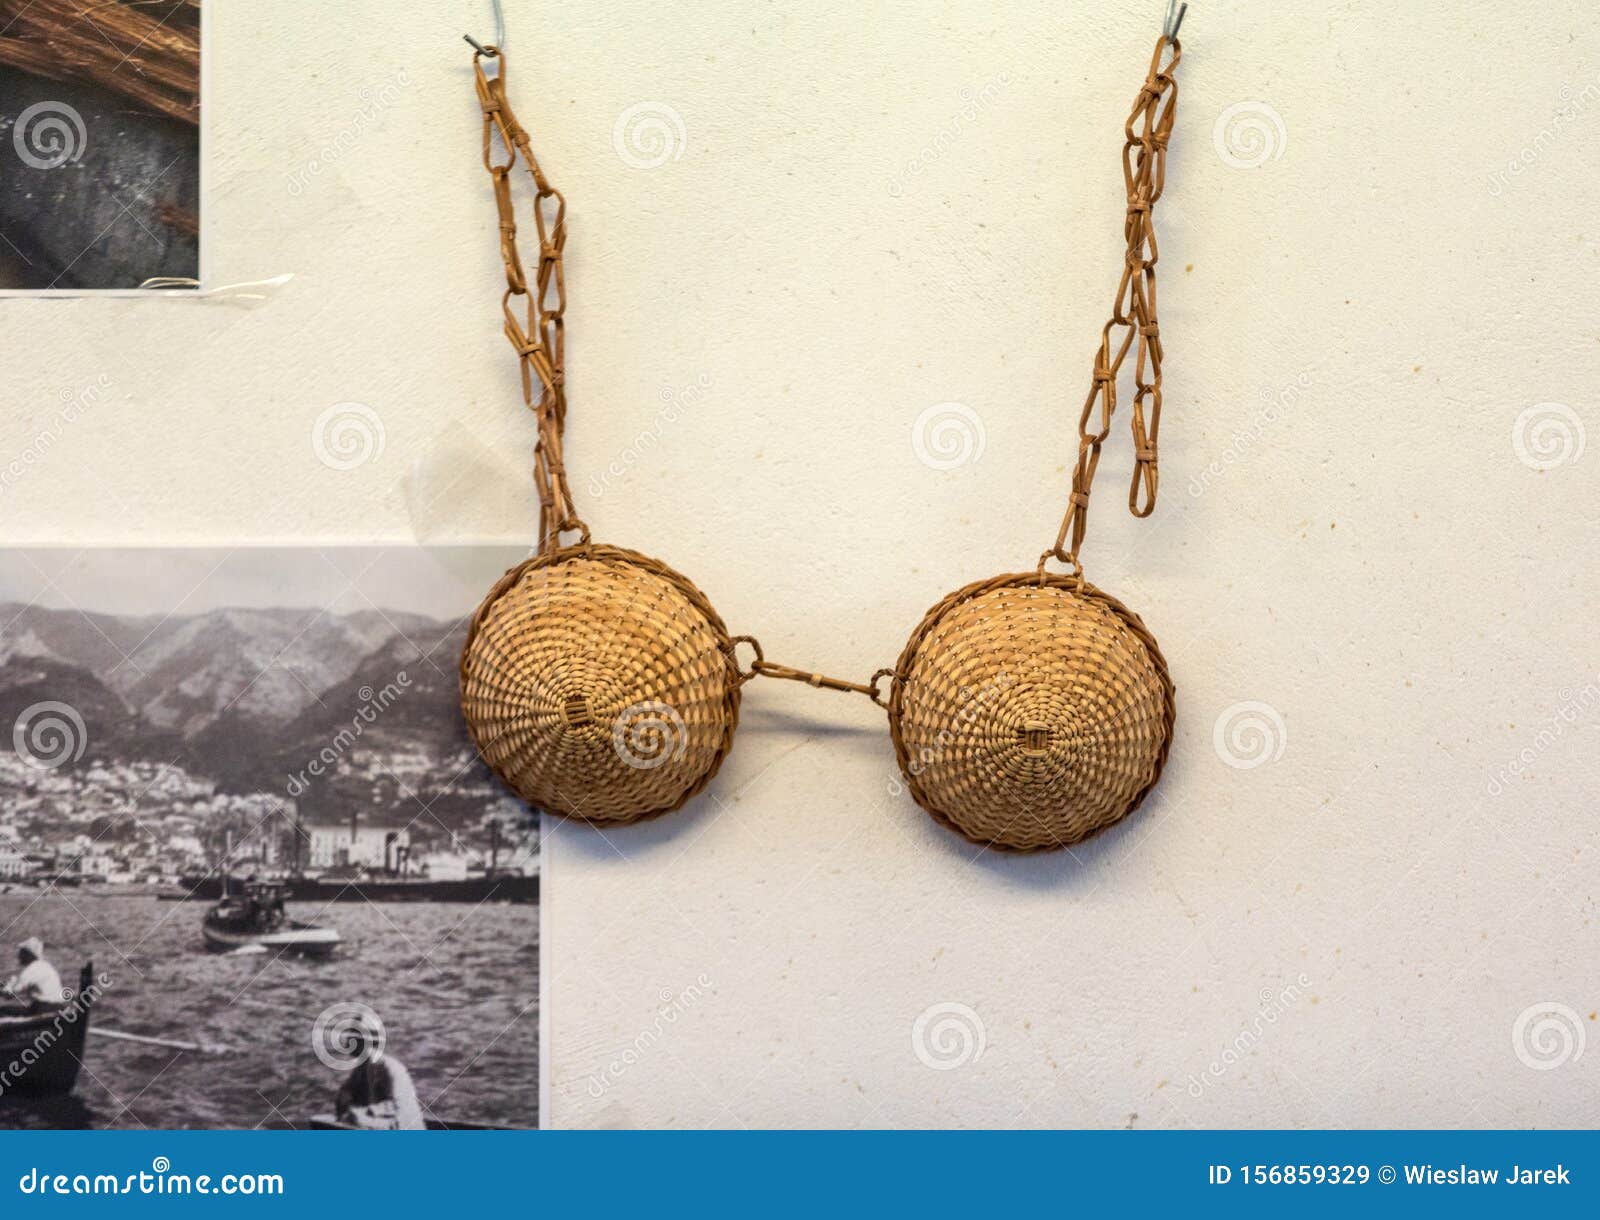 Bra Made of Wicker on Sale in a Factory Shop in Camacha on Madeira Island. Editorial Image - Image of basketwork, craftsman: 156859329